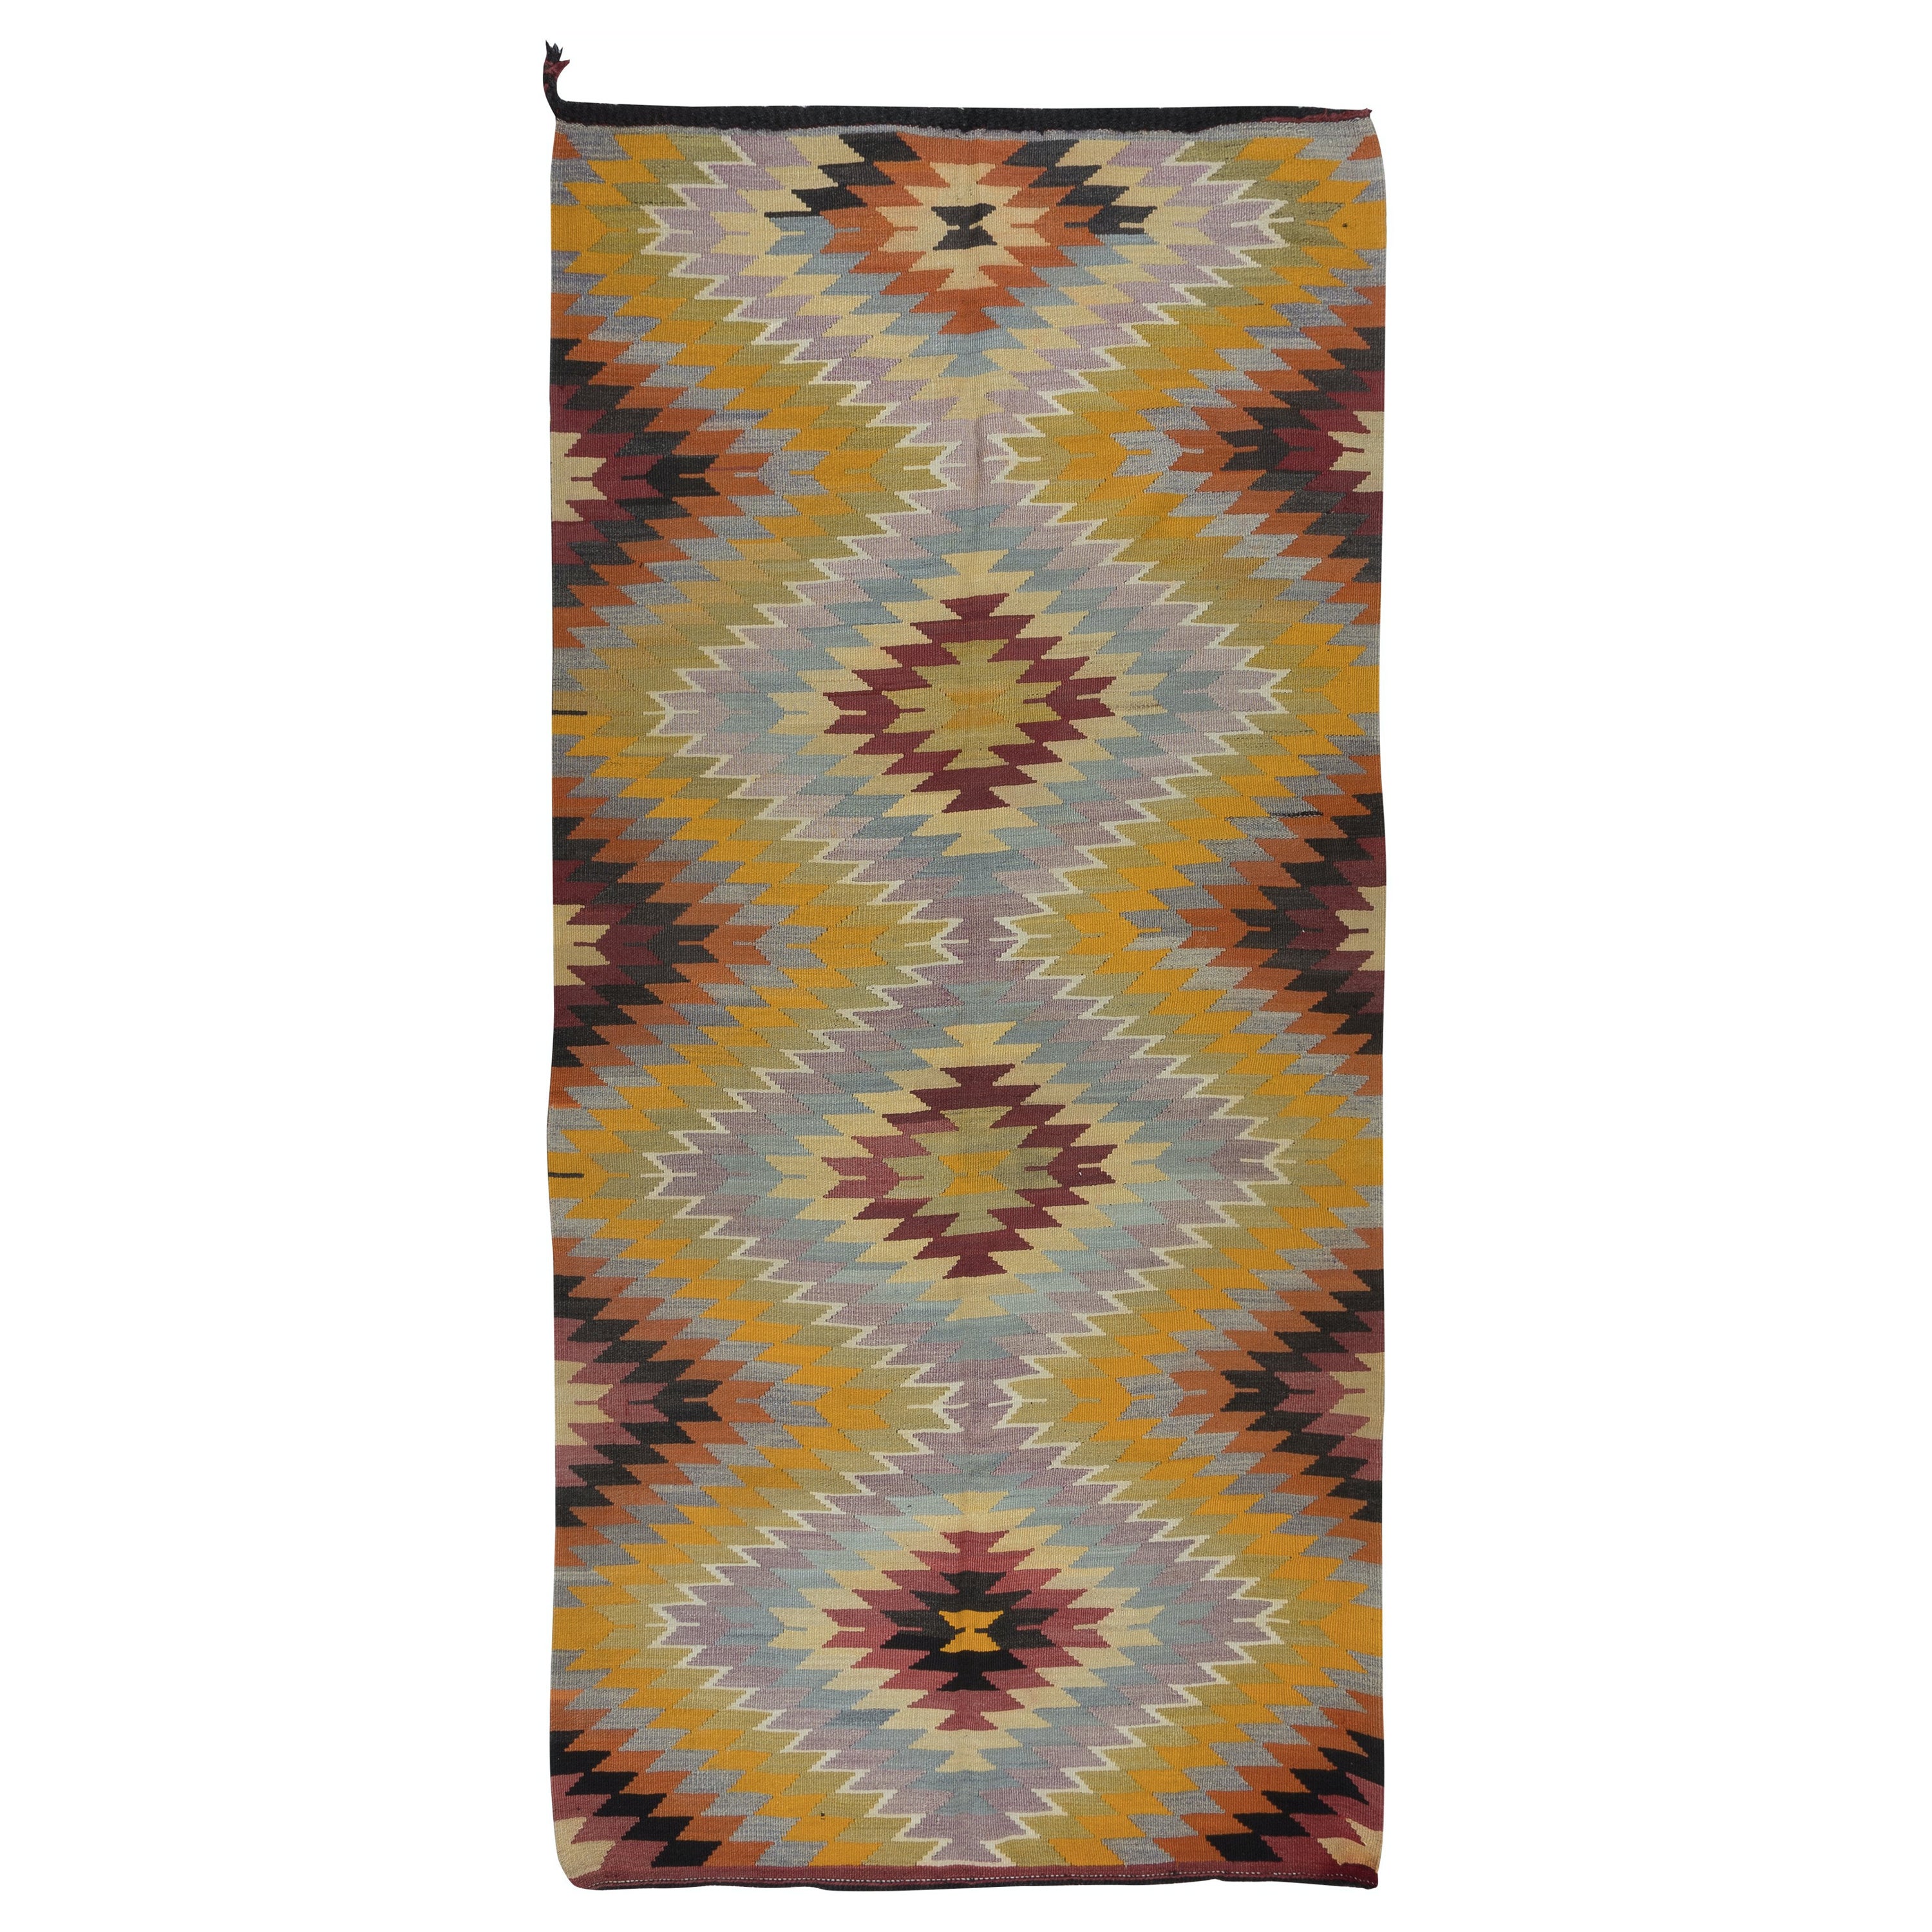 5.5x11 Ft Hand-Woven Turkish Geometric Colorful Kilim, Flat-Weave Rug, All Wool For Sale